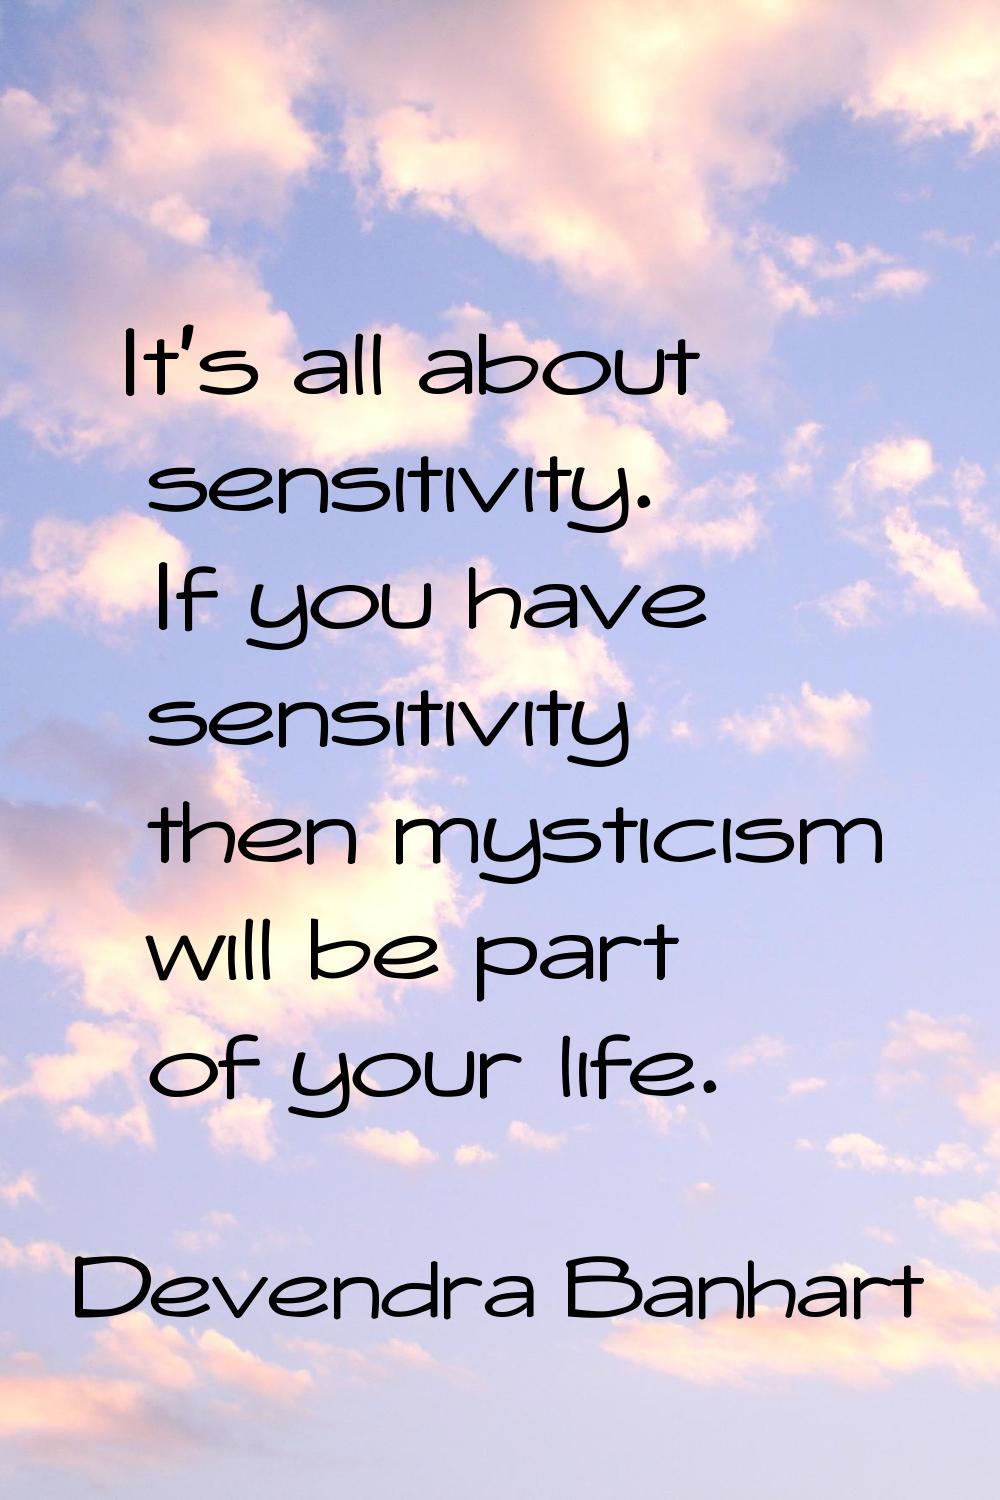 It's all about sensitivity. If you have sensitivity then mysticism will be part of your life.